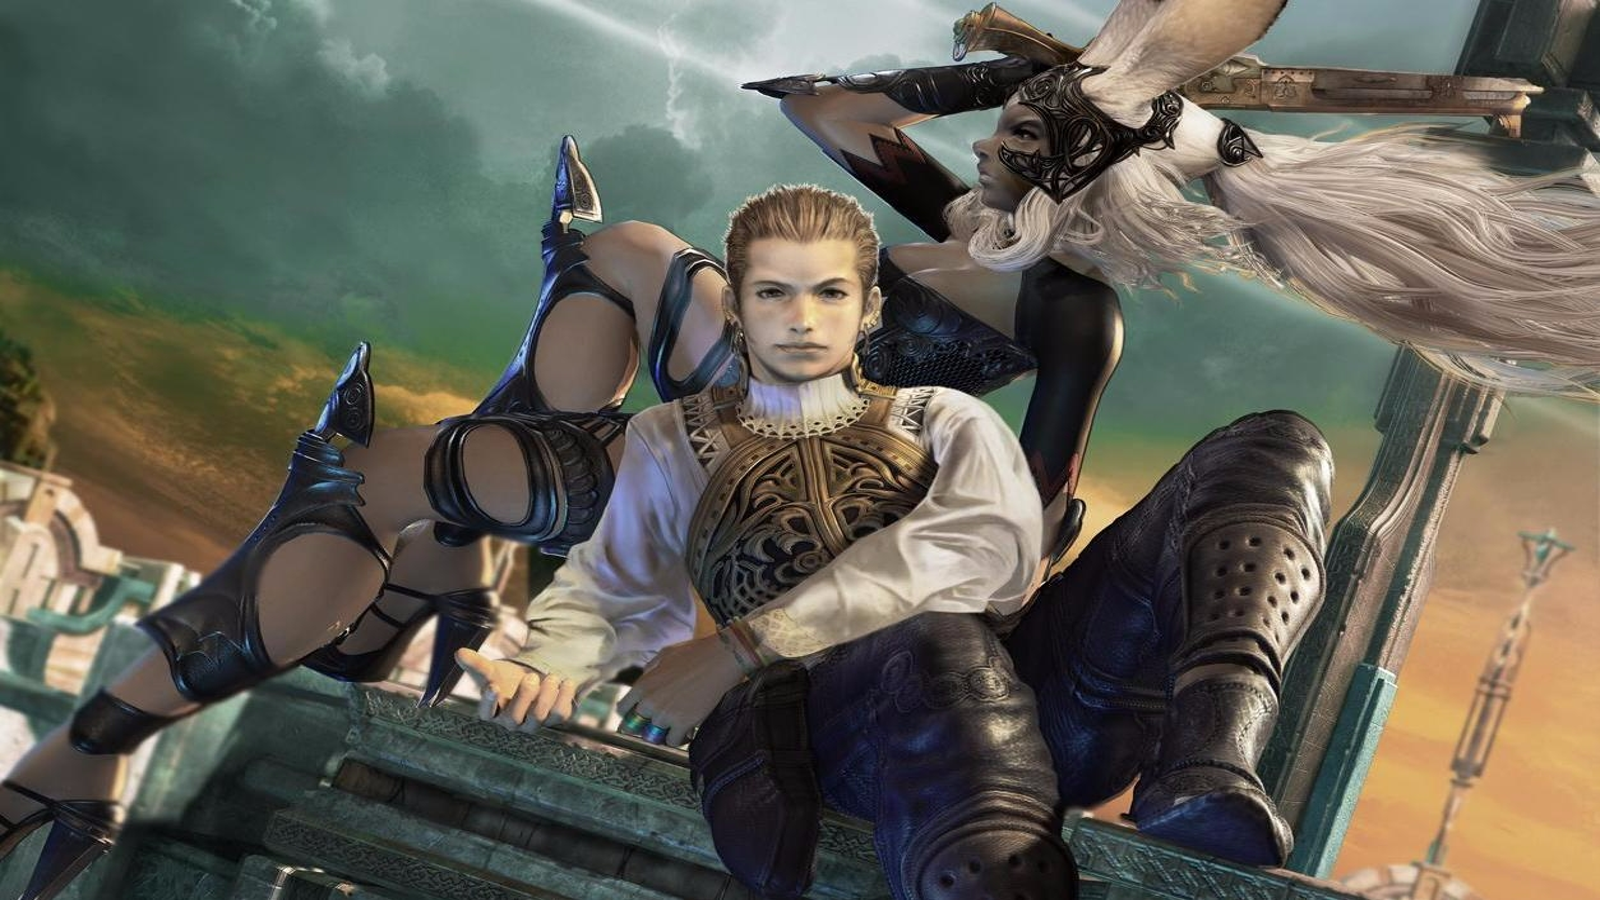 Final Fantasy XII coming to PC on February 1st